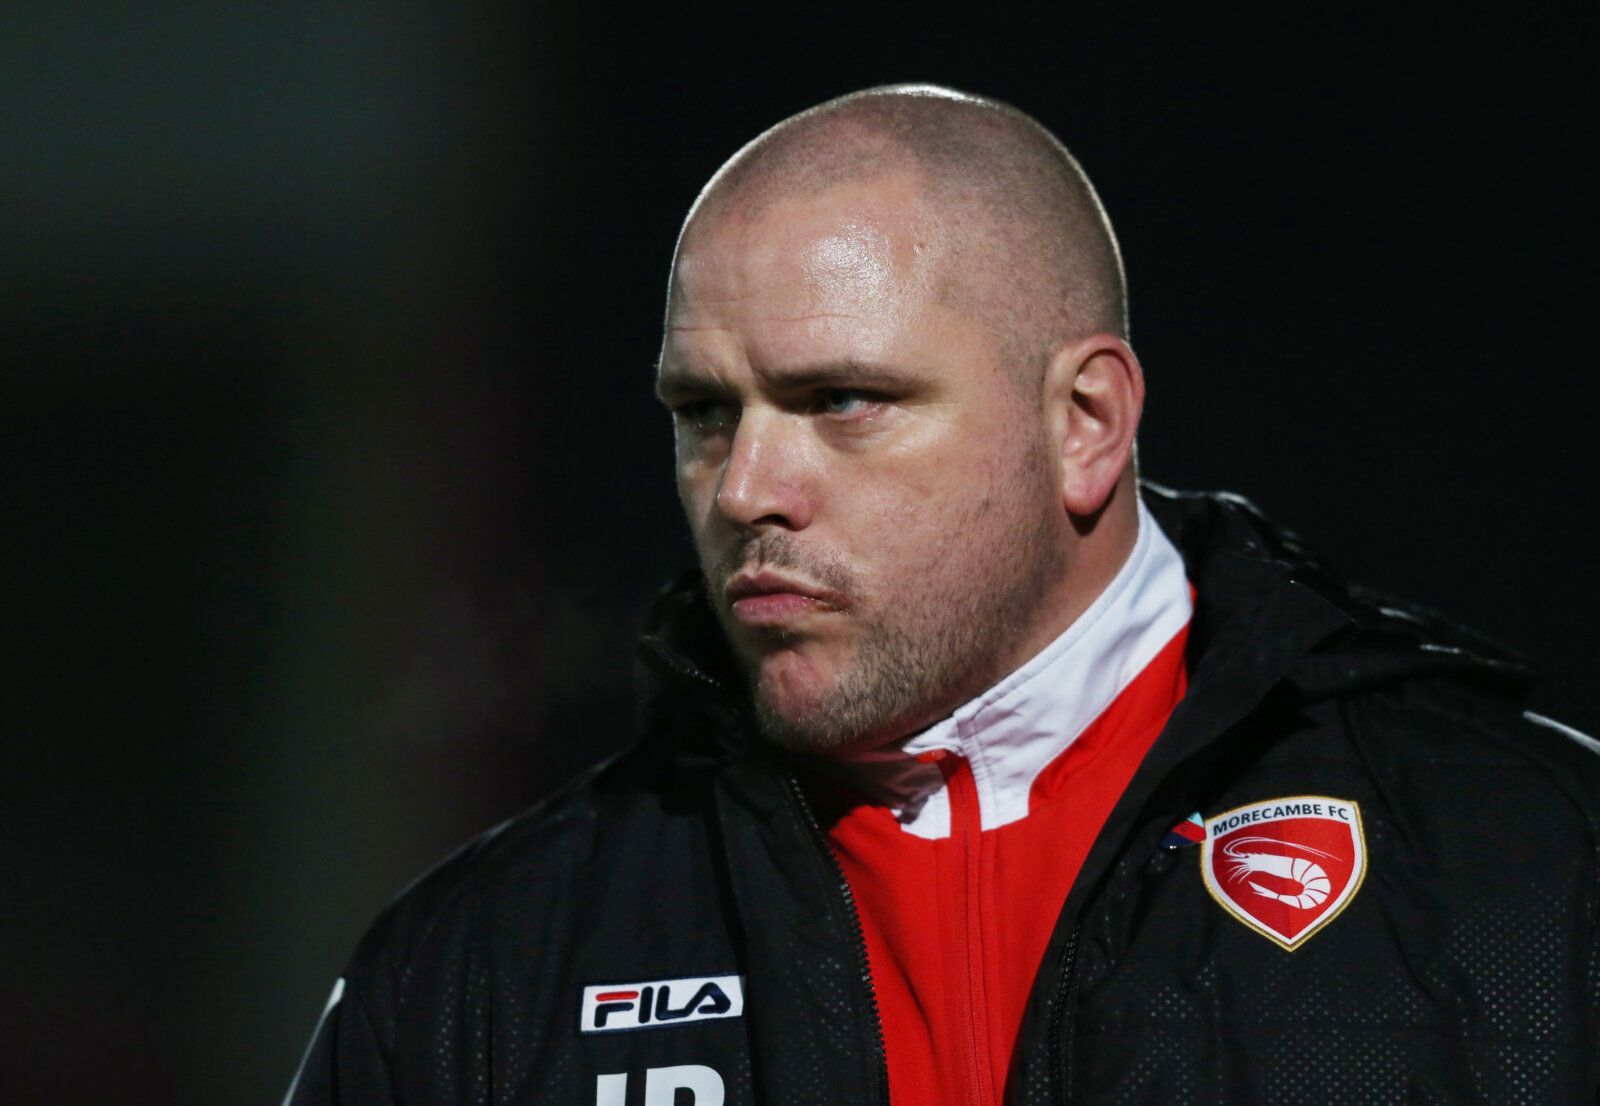 Football - Cheltenham Town v Morecambe - Sky Bet Football League Two - Whaddon Road - 14/15 , 16/1/15 
Morecambe manager Jim Bentley 
Mandatory Credit: Action Images / Peter Cziborra 
EDITORIAL USE ONLY. No use with unauthorized audio, video, data, fixture lists, club/league logos or 